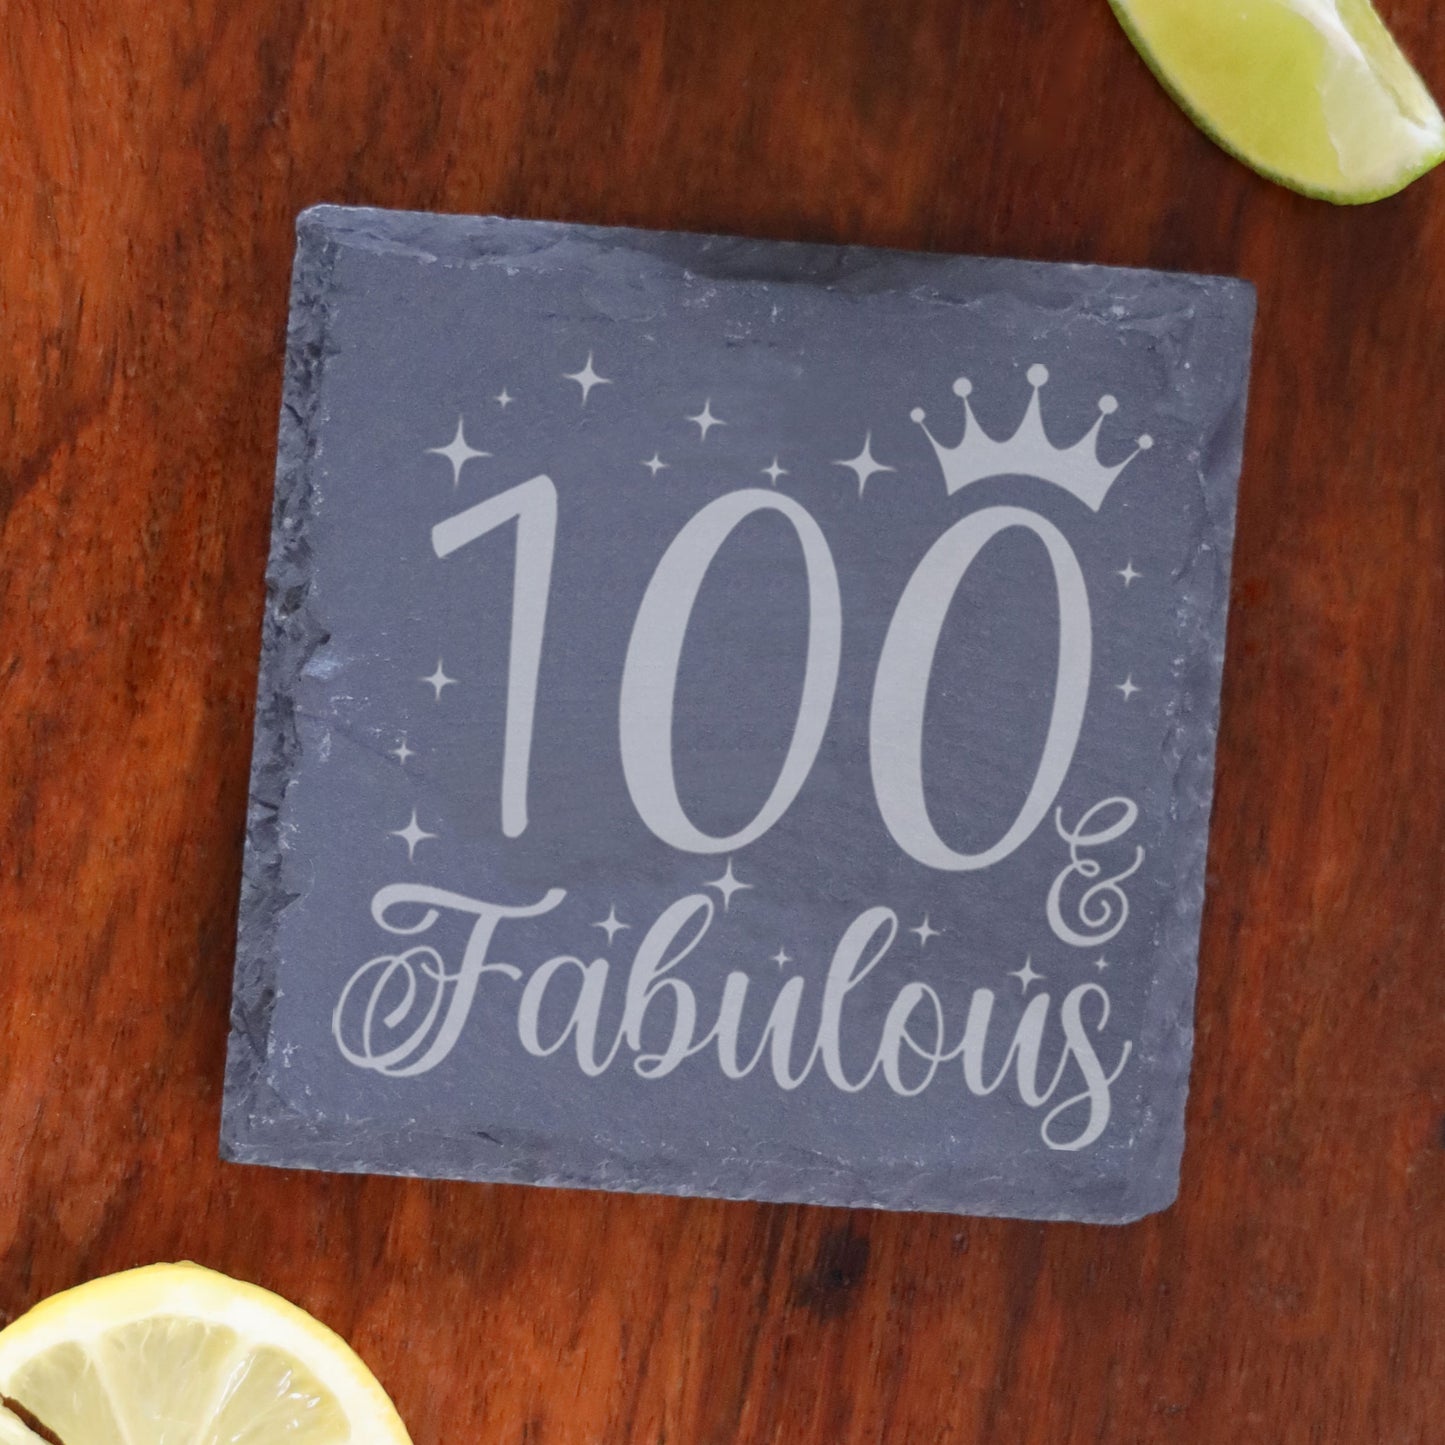 100 & Fabulous 100th Birthday Gift Engraved Wine Glass and/or Coaster Set  - Always Looking Good - Square Coaster Only  